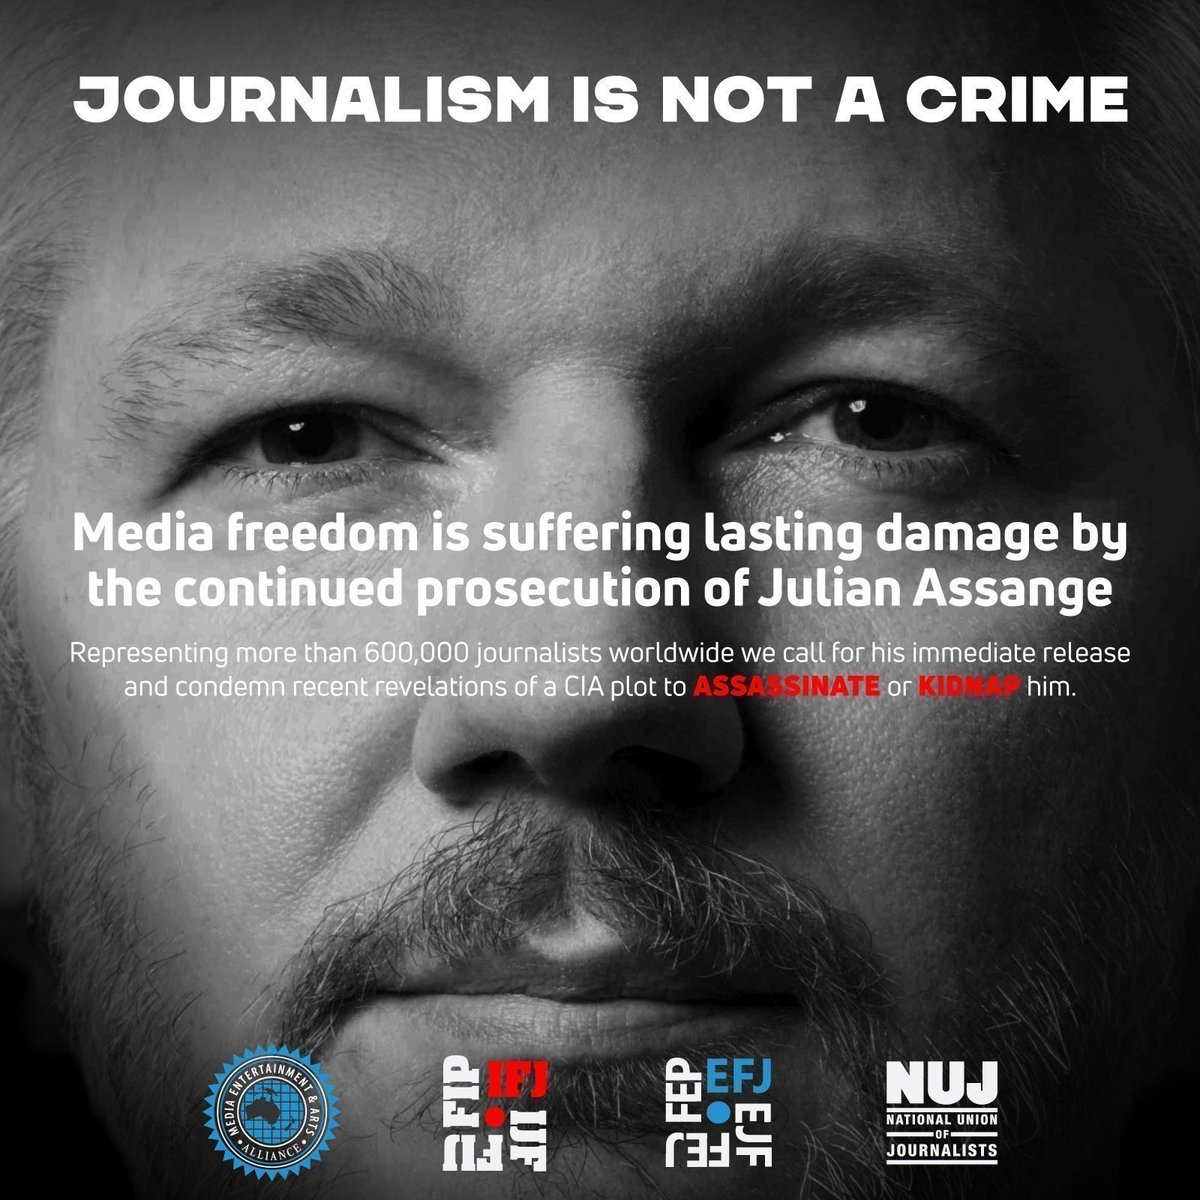 ACLU: 'The Government needs to drop the charges against Assange' Freedom of the Press Foundation: 'The Biden admin must drop the charges against Assange immediately' Amnesty: Assange prosecution is 'politically motivated and unjustified' #FreeAssangeNOW